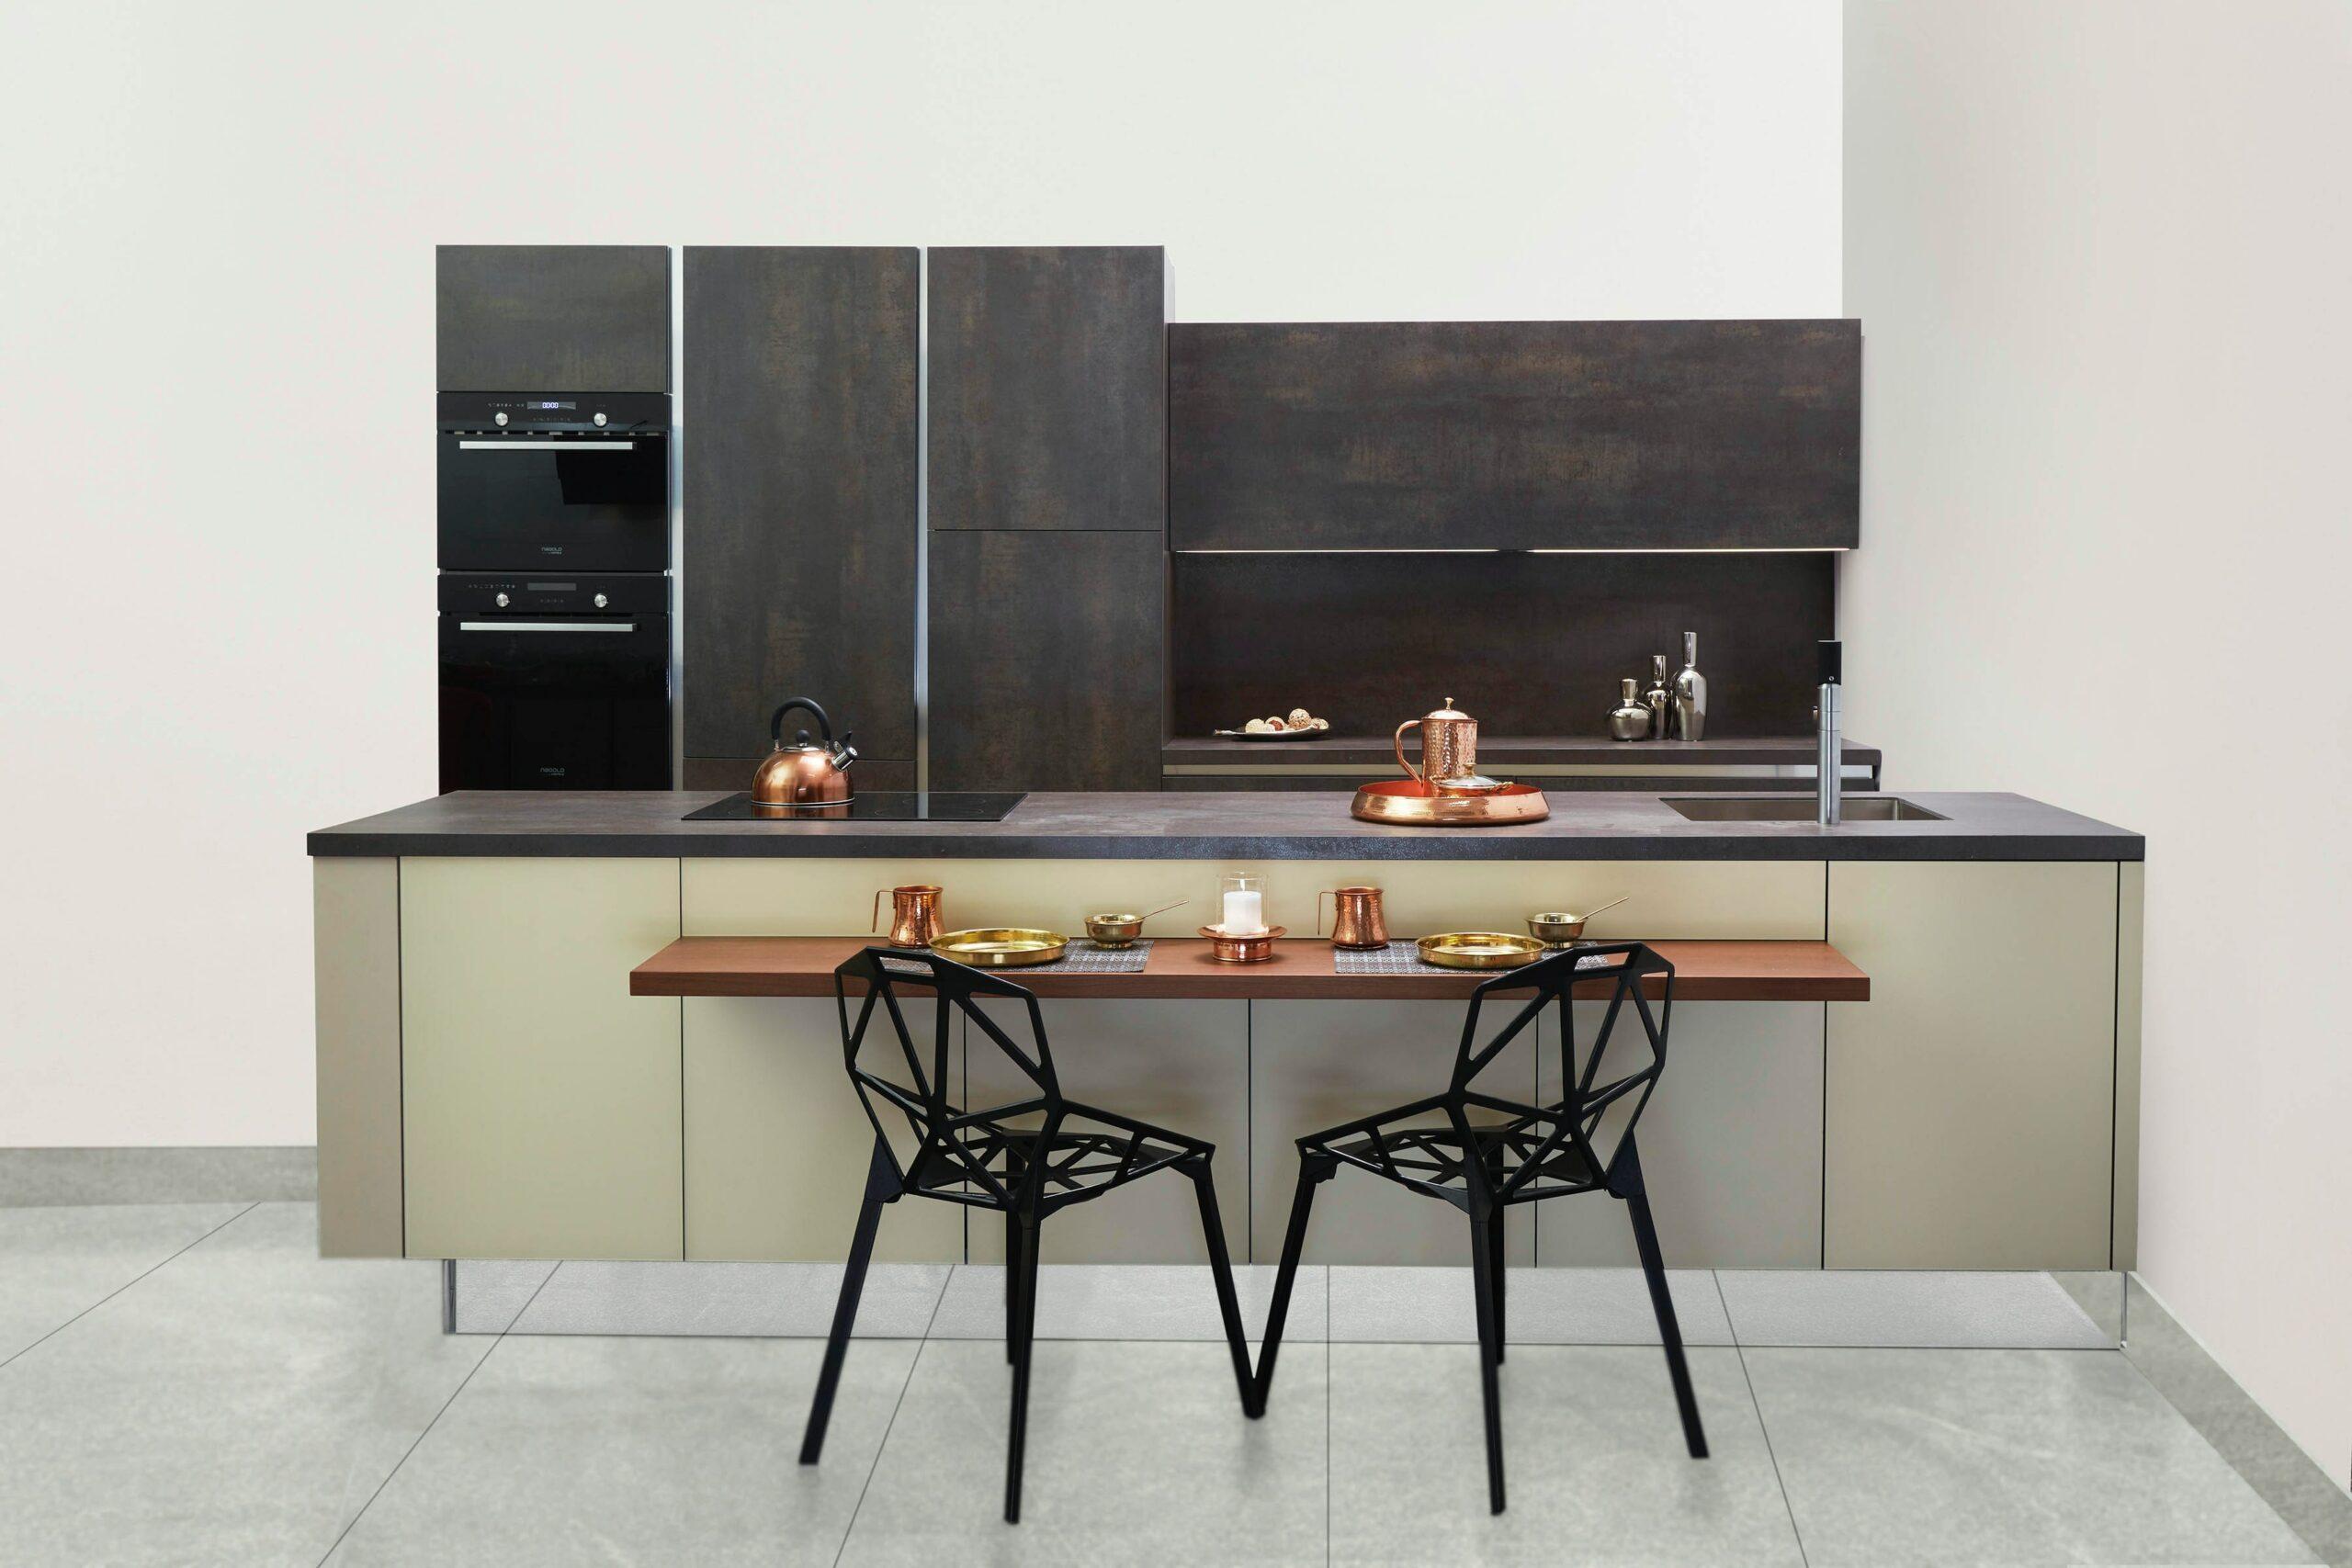 a kitchen interior with two black chairs and rose gold appliances